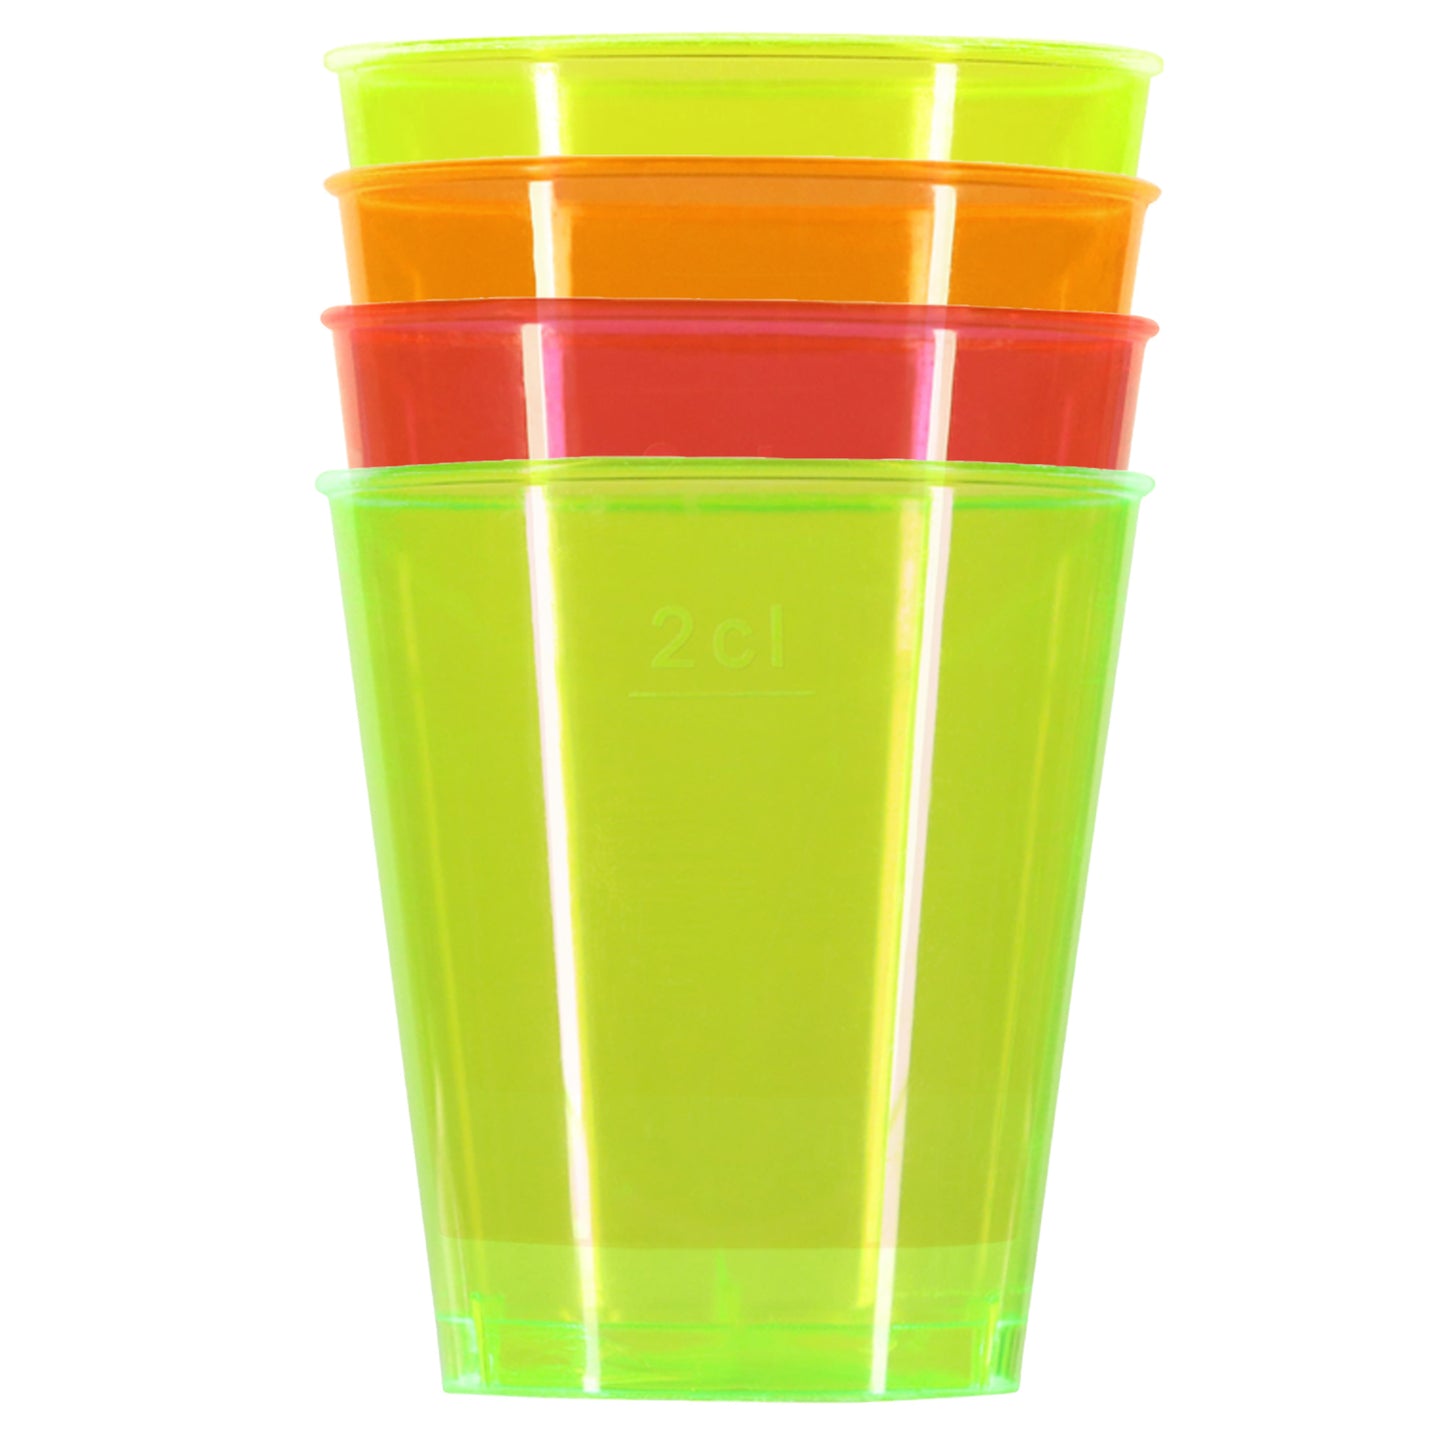 36 x Neon Shot Glasses Plastic Marked 3cl 30ml Bright Colour Jelly Disposable-5056020195412-PCUP-3CLDIS-Product Pro-30ml, Bright Shot Glasses, Disposable Shot Glasses, Neon, Neon Shot Glasses, Plastic Shot Glasses, Shots